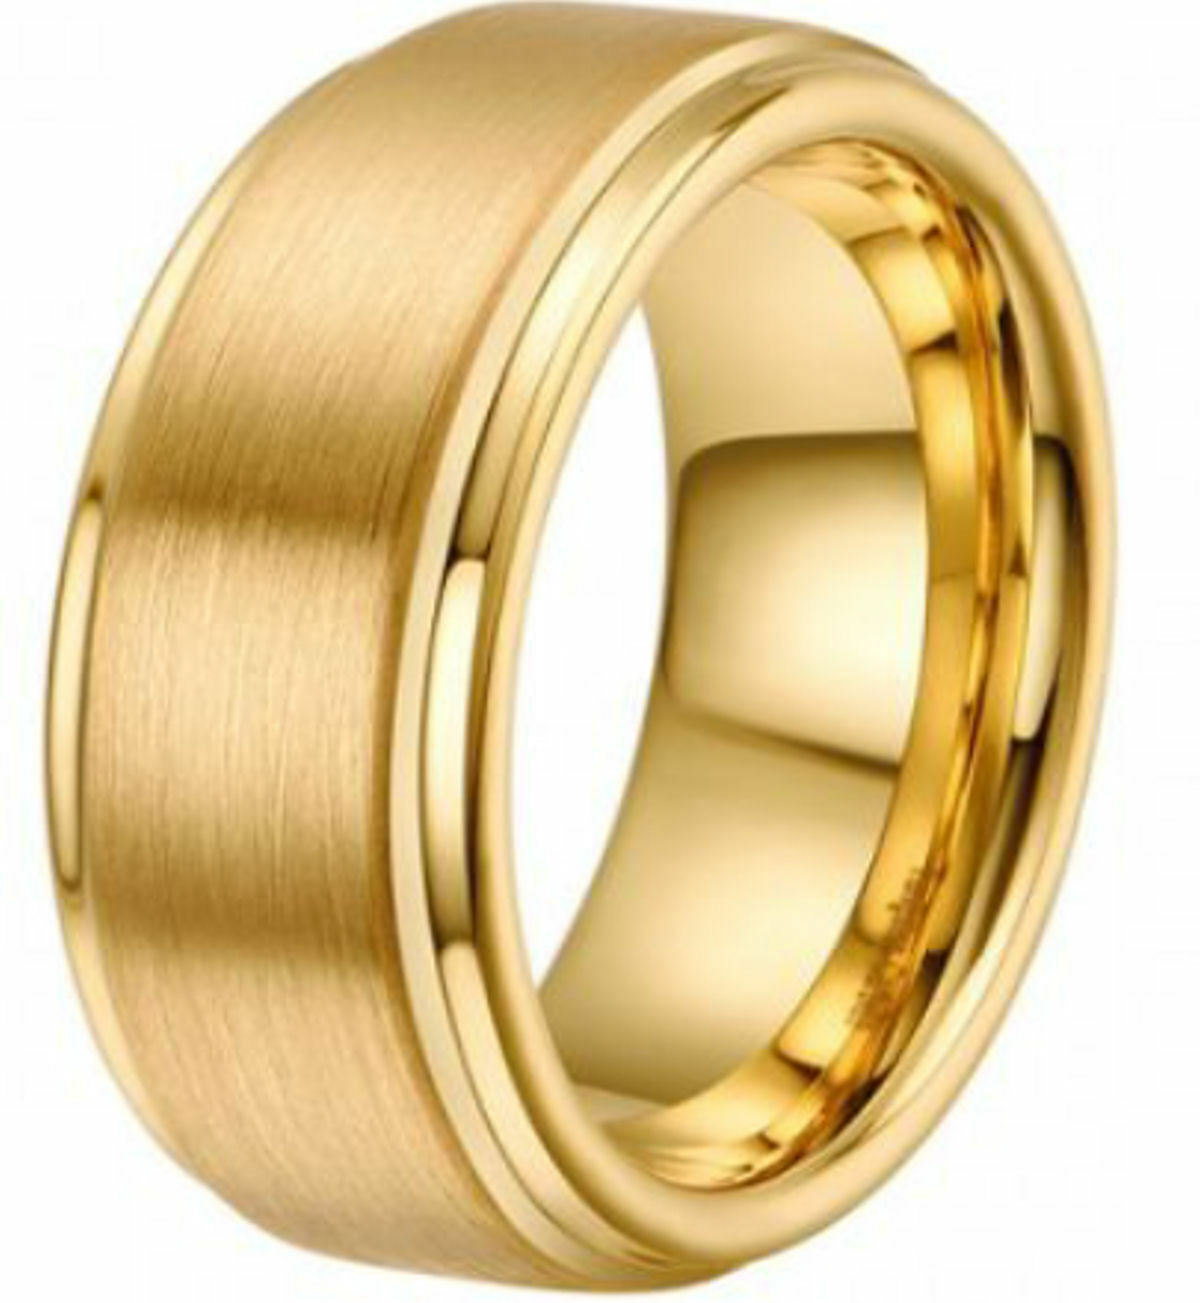 8mm Tungsten Ring Wedding Band  Yellow Gold Plated Matte Finish Comfort Fit